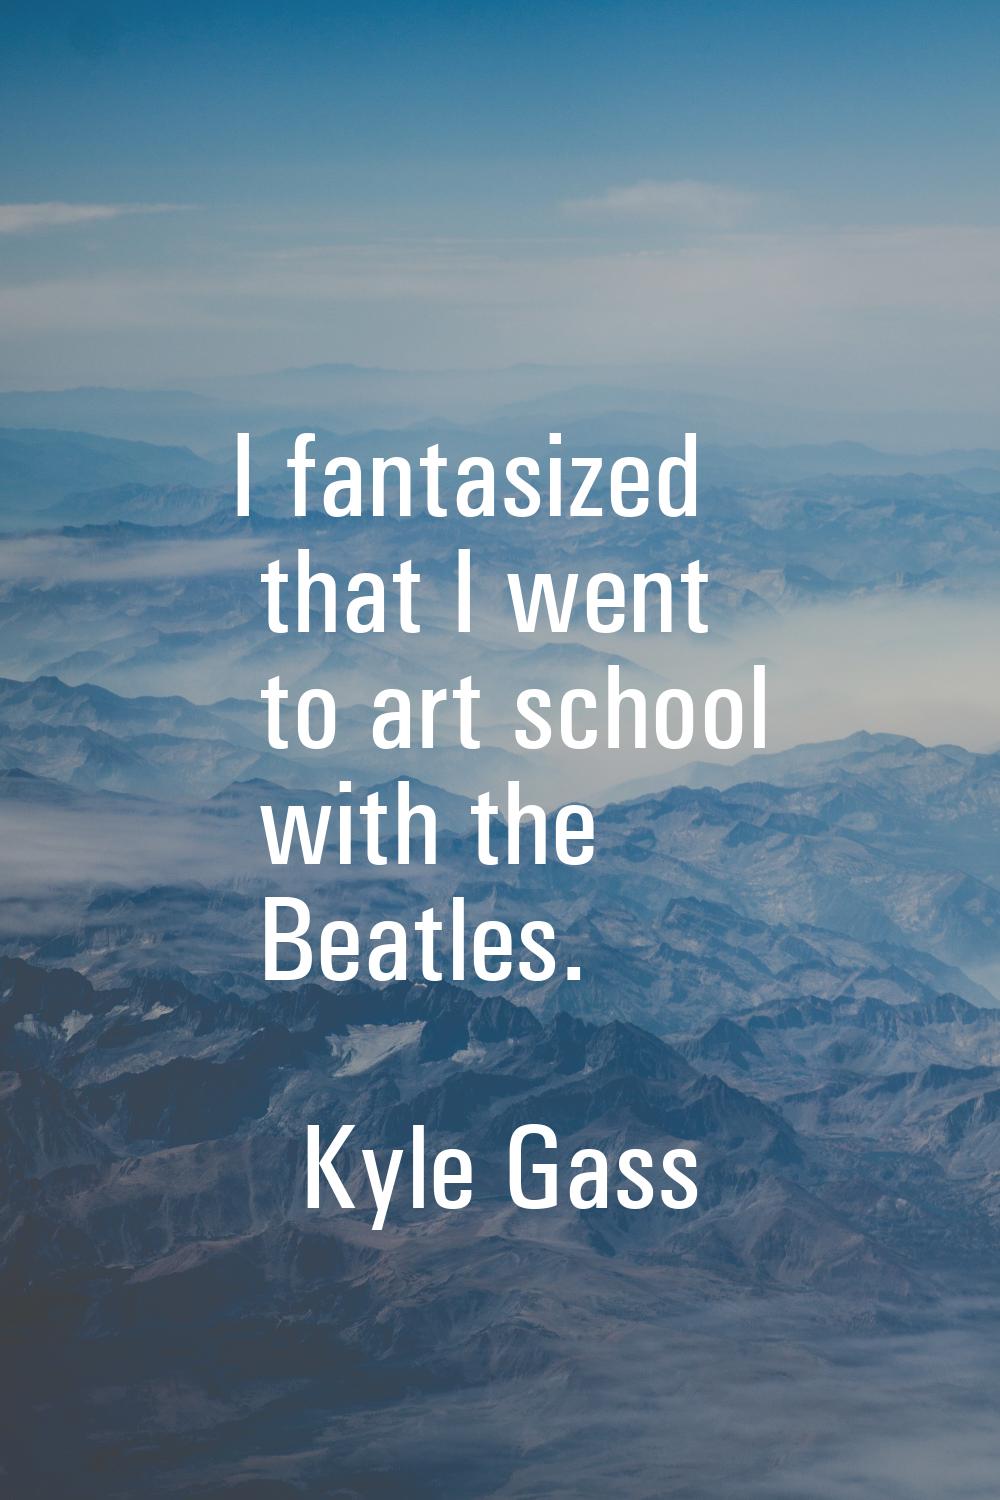 I fantasized that I went to art school with the Beatles.